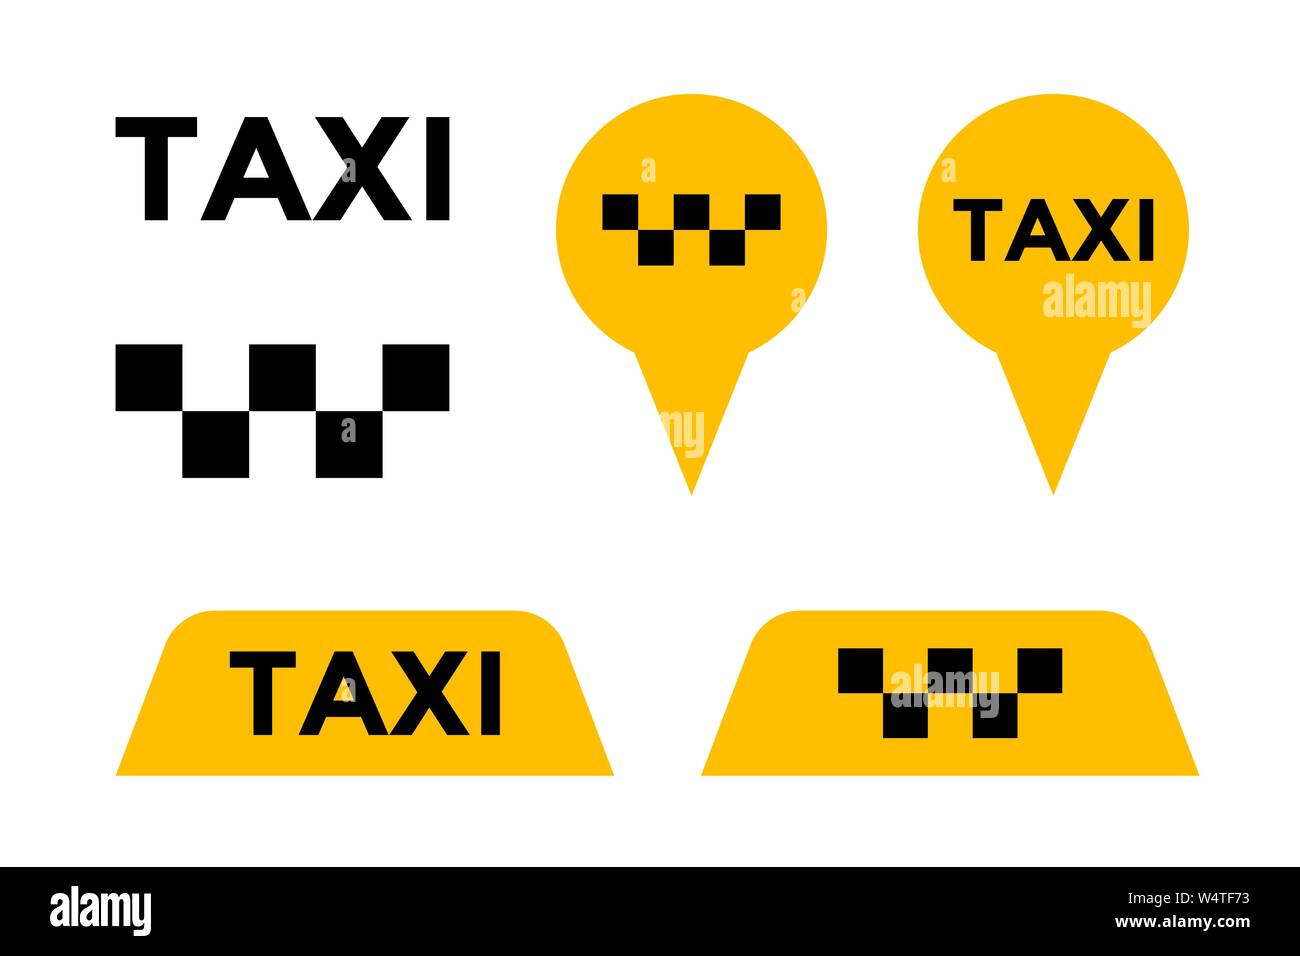 Taxi cab service vector icon set. Yellow signboard and pin signs of passenger city transport markers. Vector element illustration Stock Vector